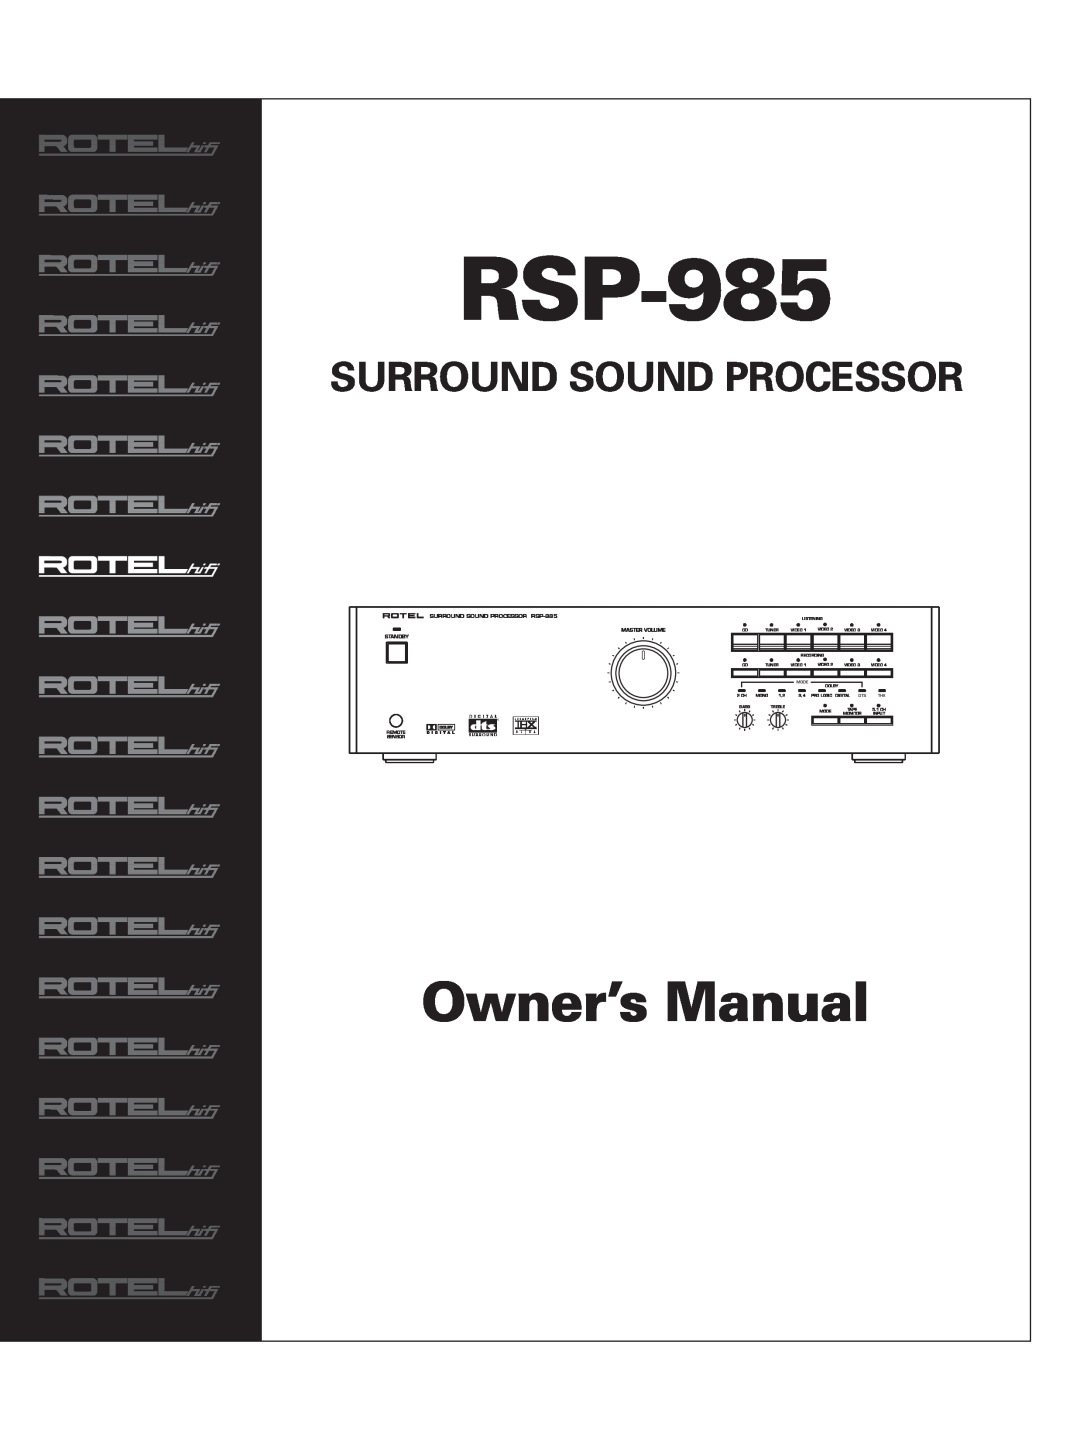 Rotel owner manual Surround Sound Processor, SURROUND SOUND PROCESSOR RSP-985, Master Volume, Standby 